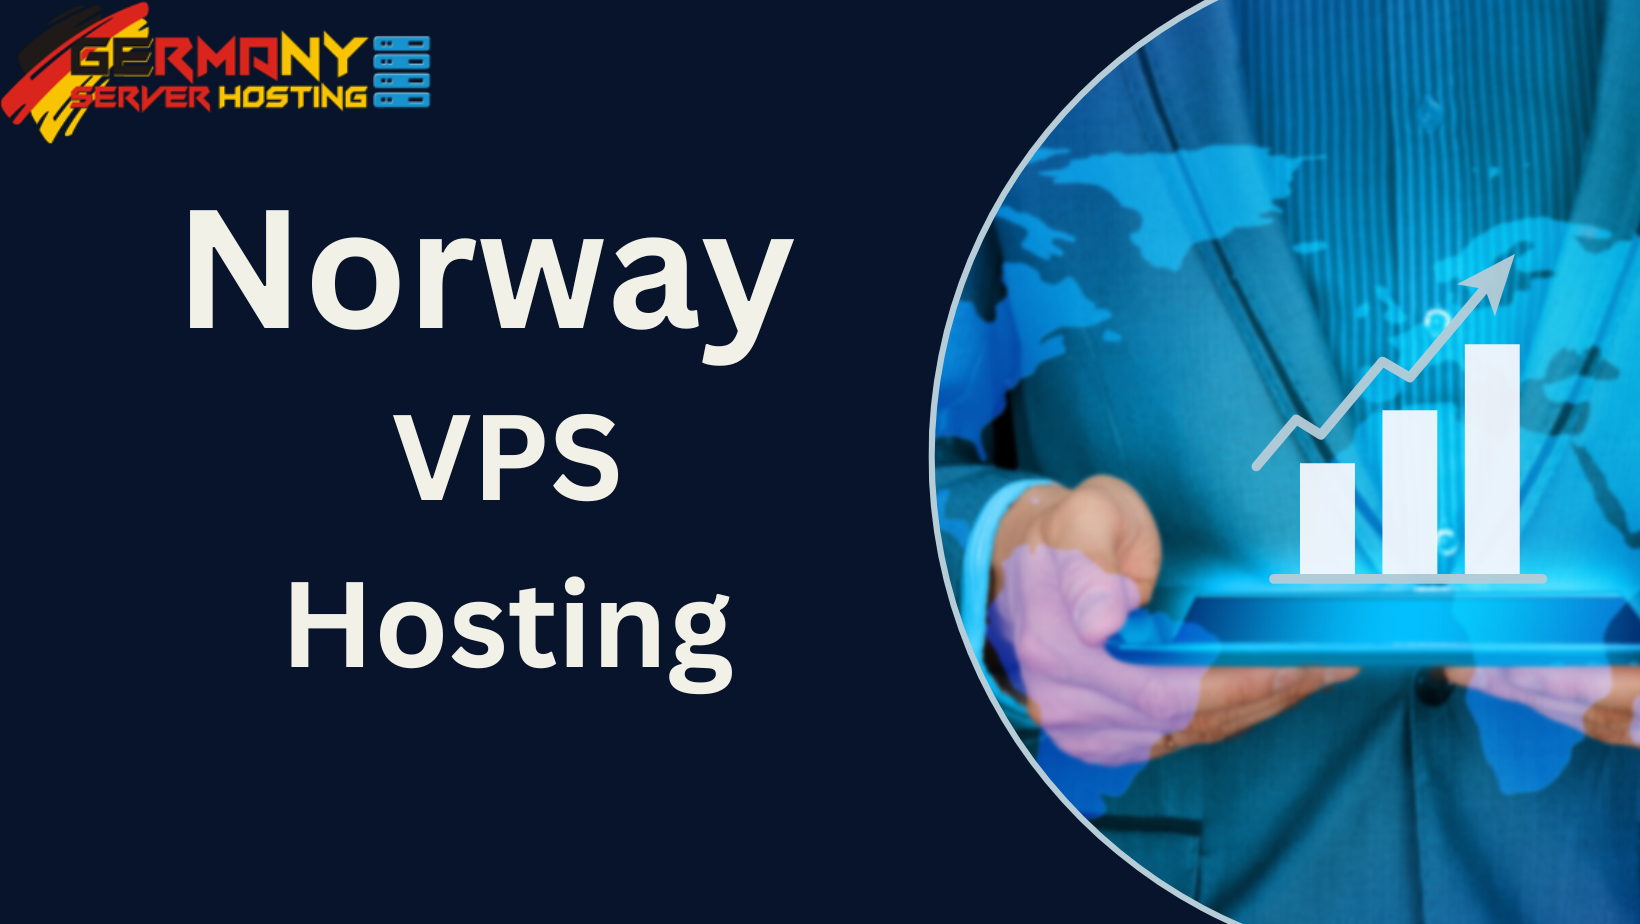 Norway VPS Hosting Offer Best Hosting Solution for Small and Middle Businesses